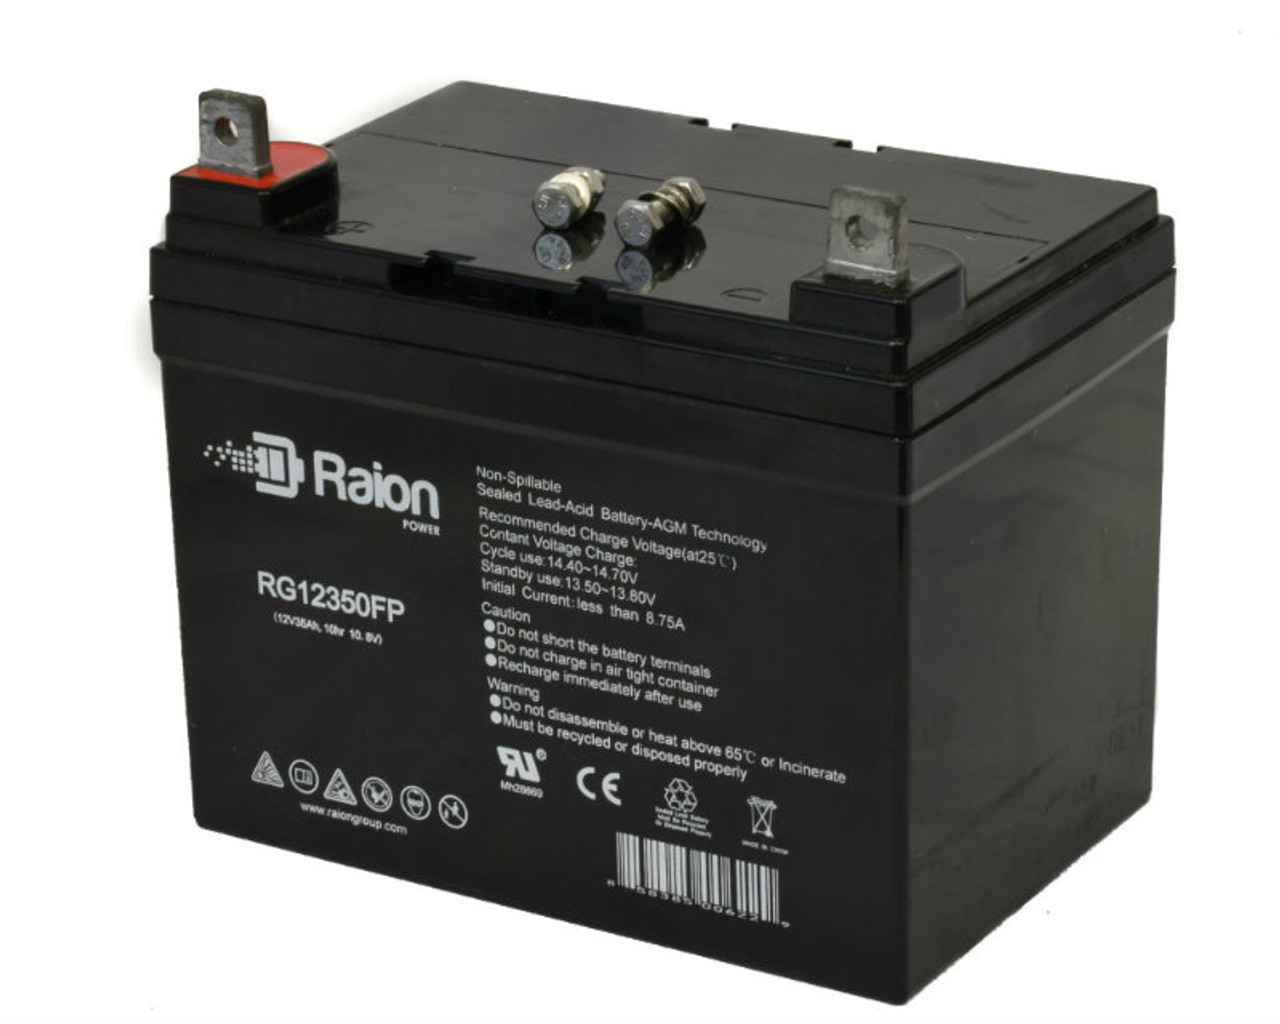 Raion Power Replacement 12V 35Ah RG12350FP Battery for Poulan Pro PP2050